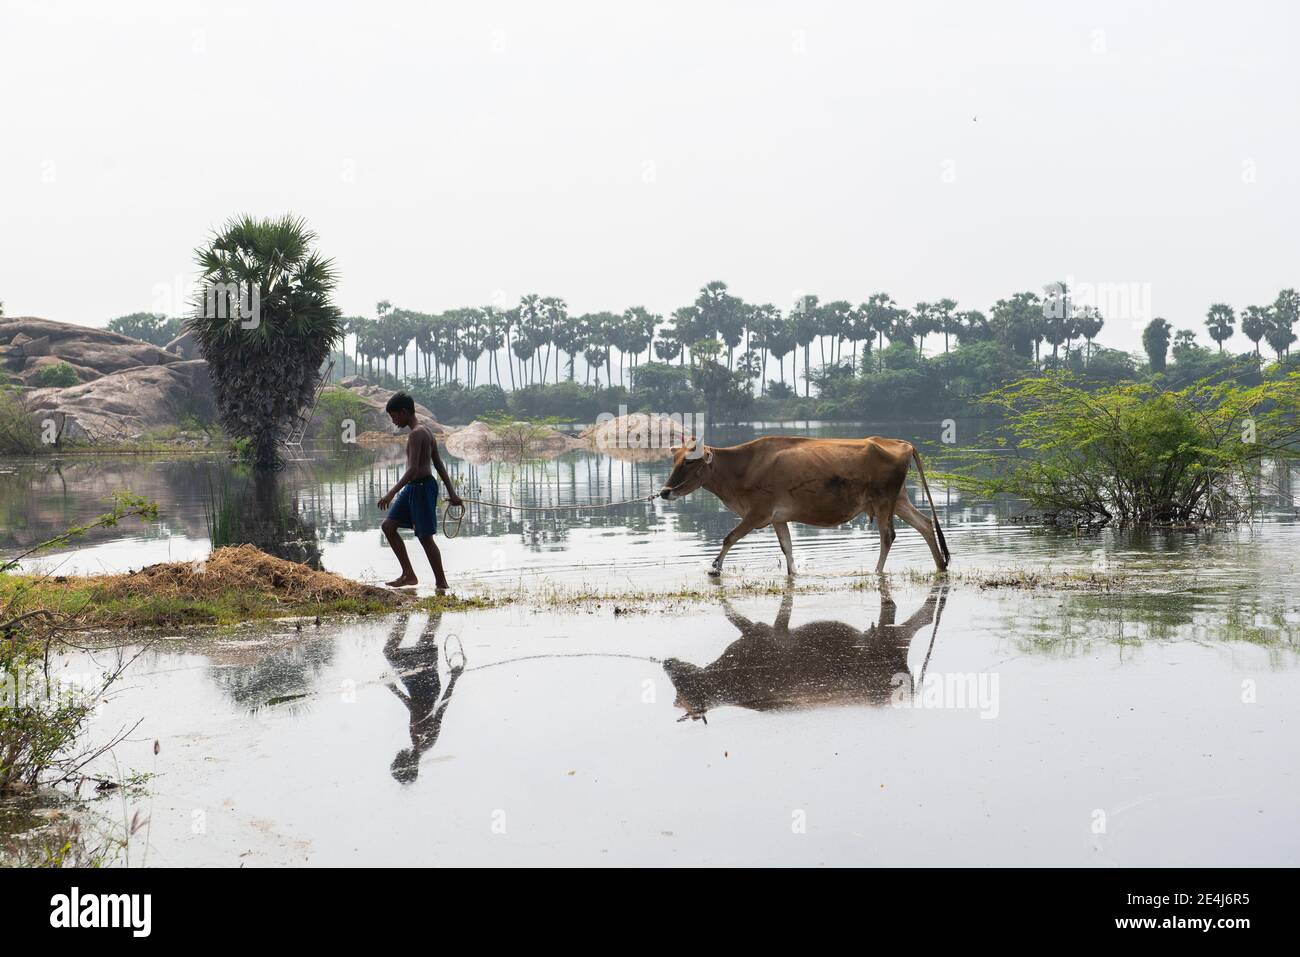 Gingee, Tamil Nadu, India - January 2021: A boy taking a cow to the lake. Stock Photo